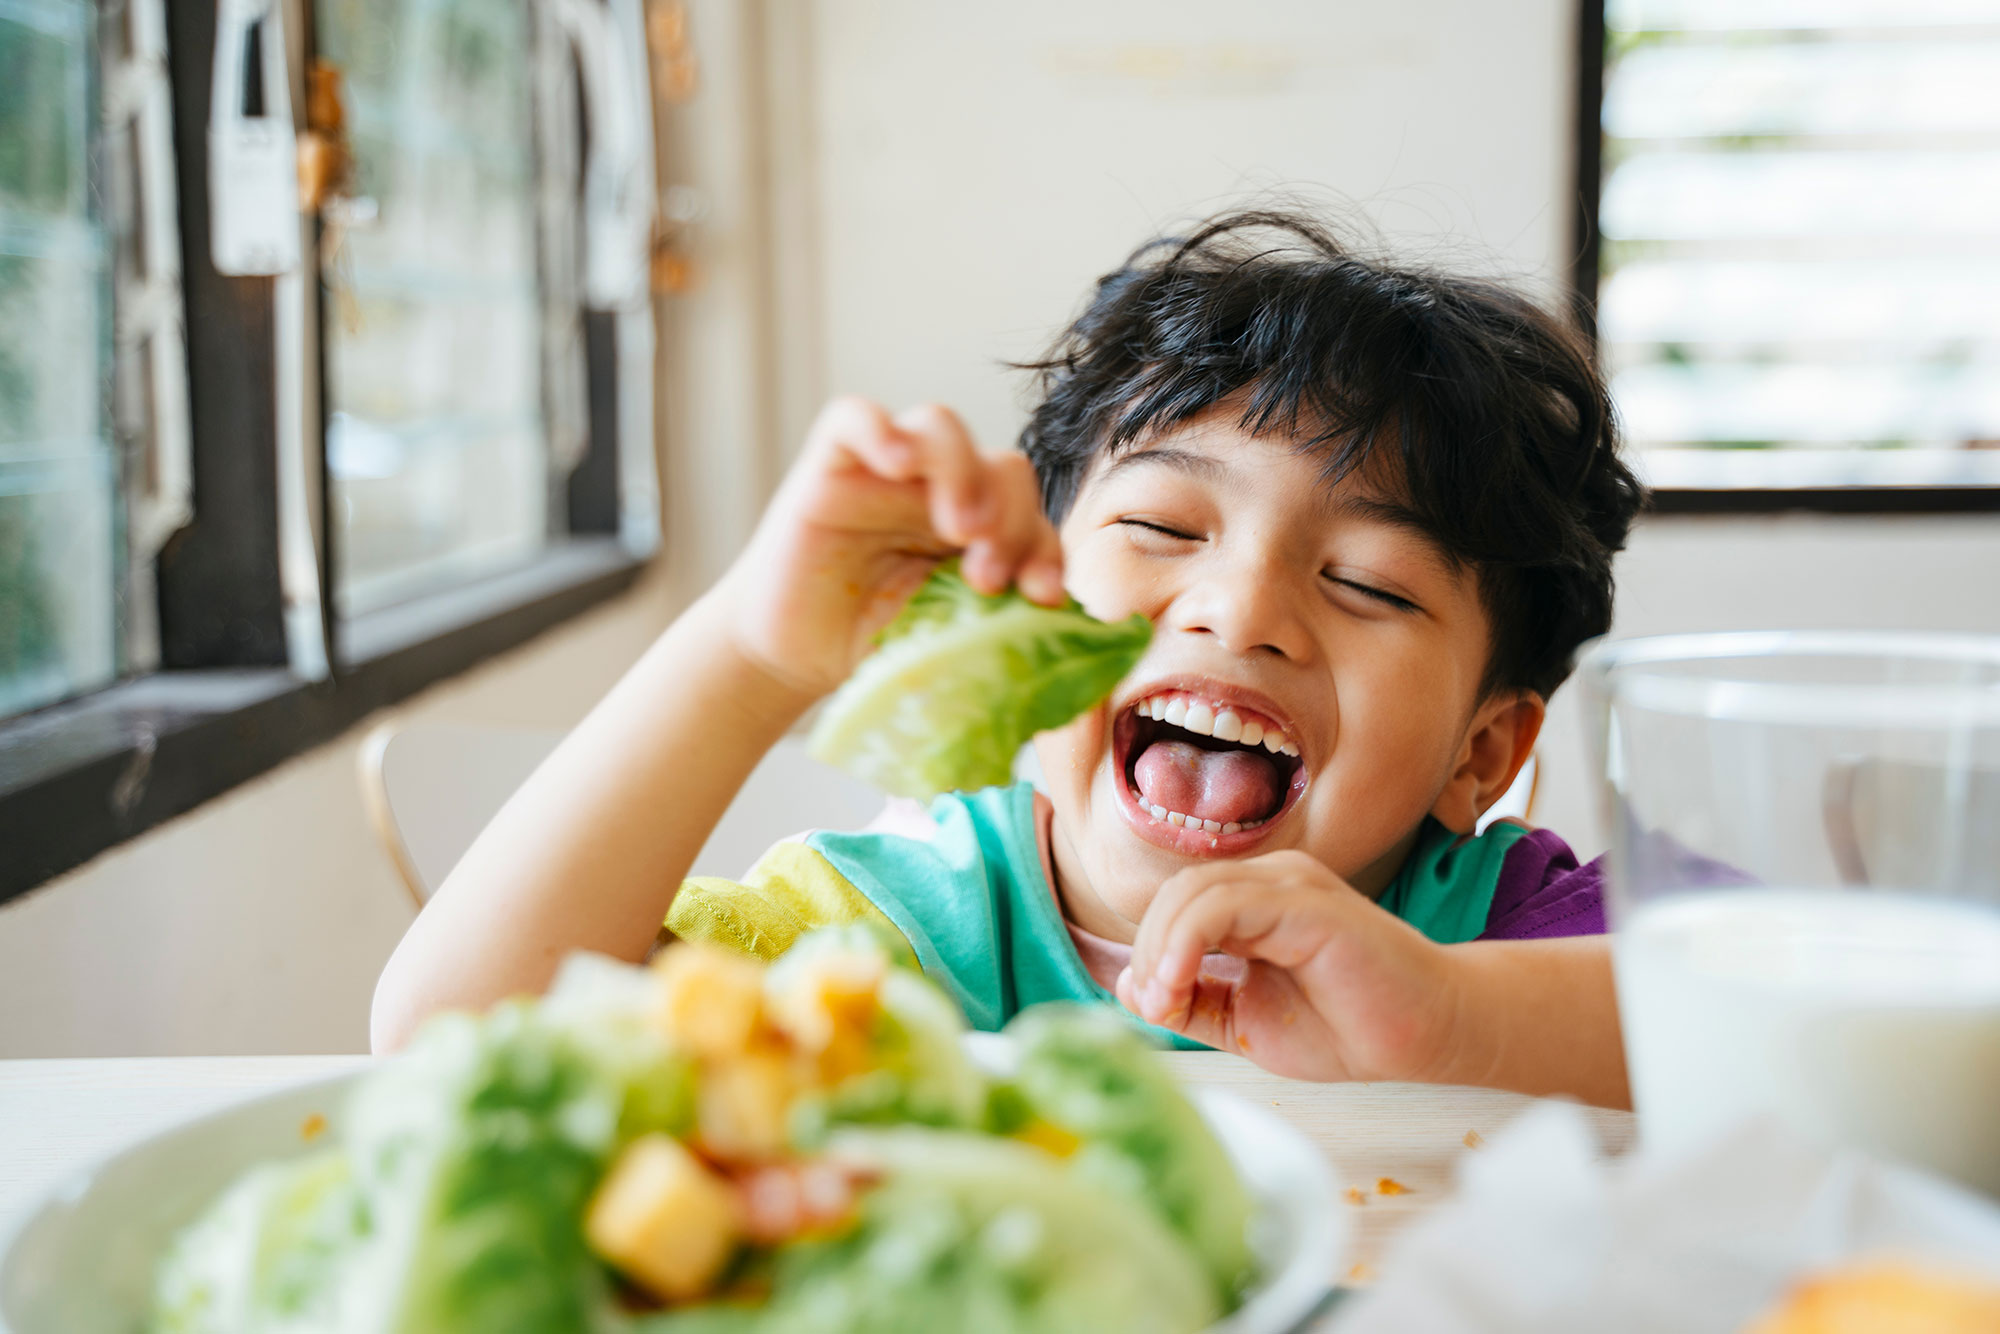 Nutrition in early childhood: a critical period for early brain development